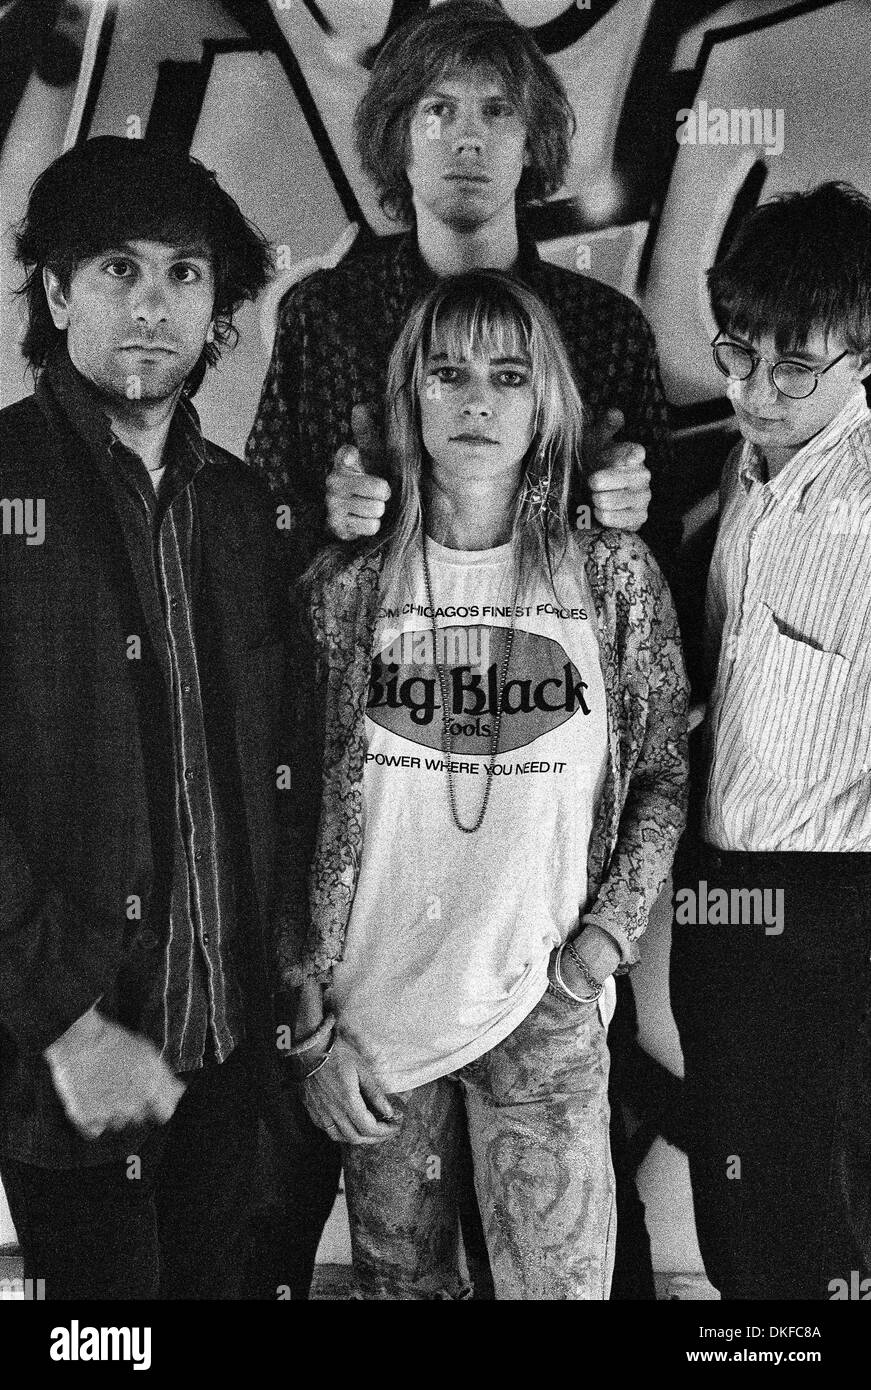 Sonic Youth in London 1987 Stockfoto